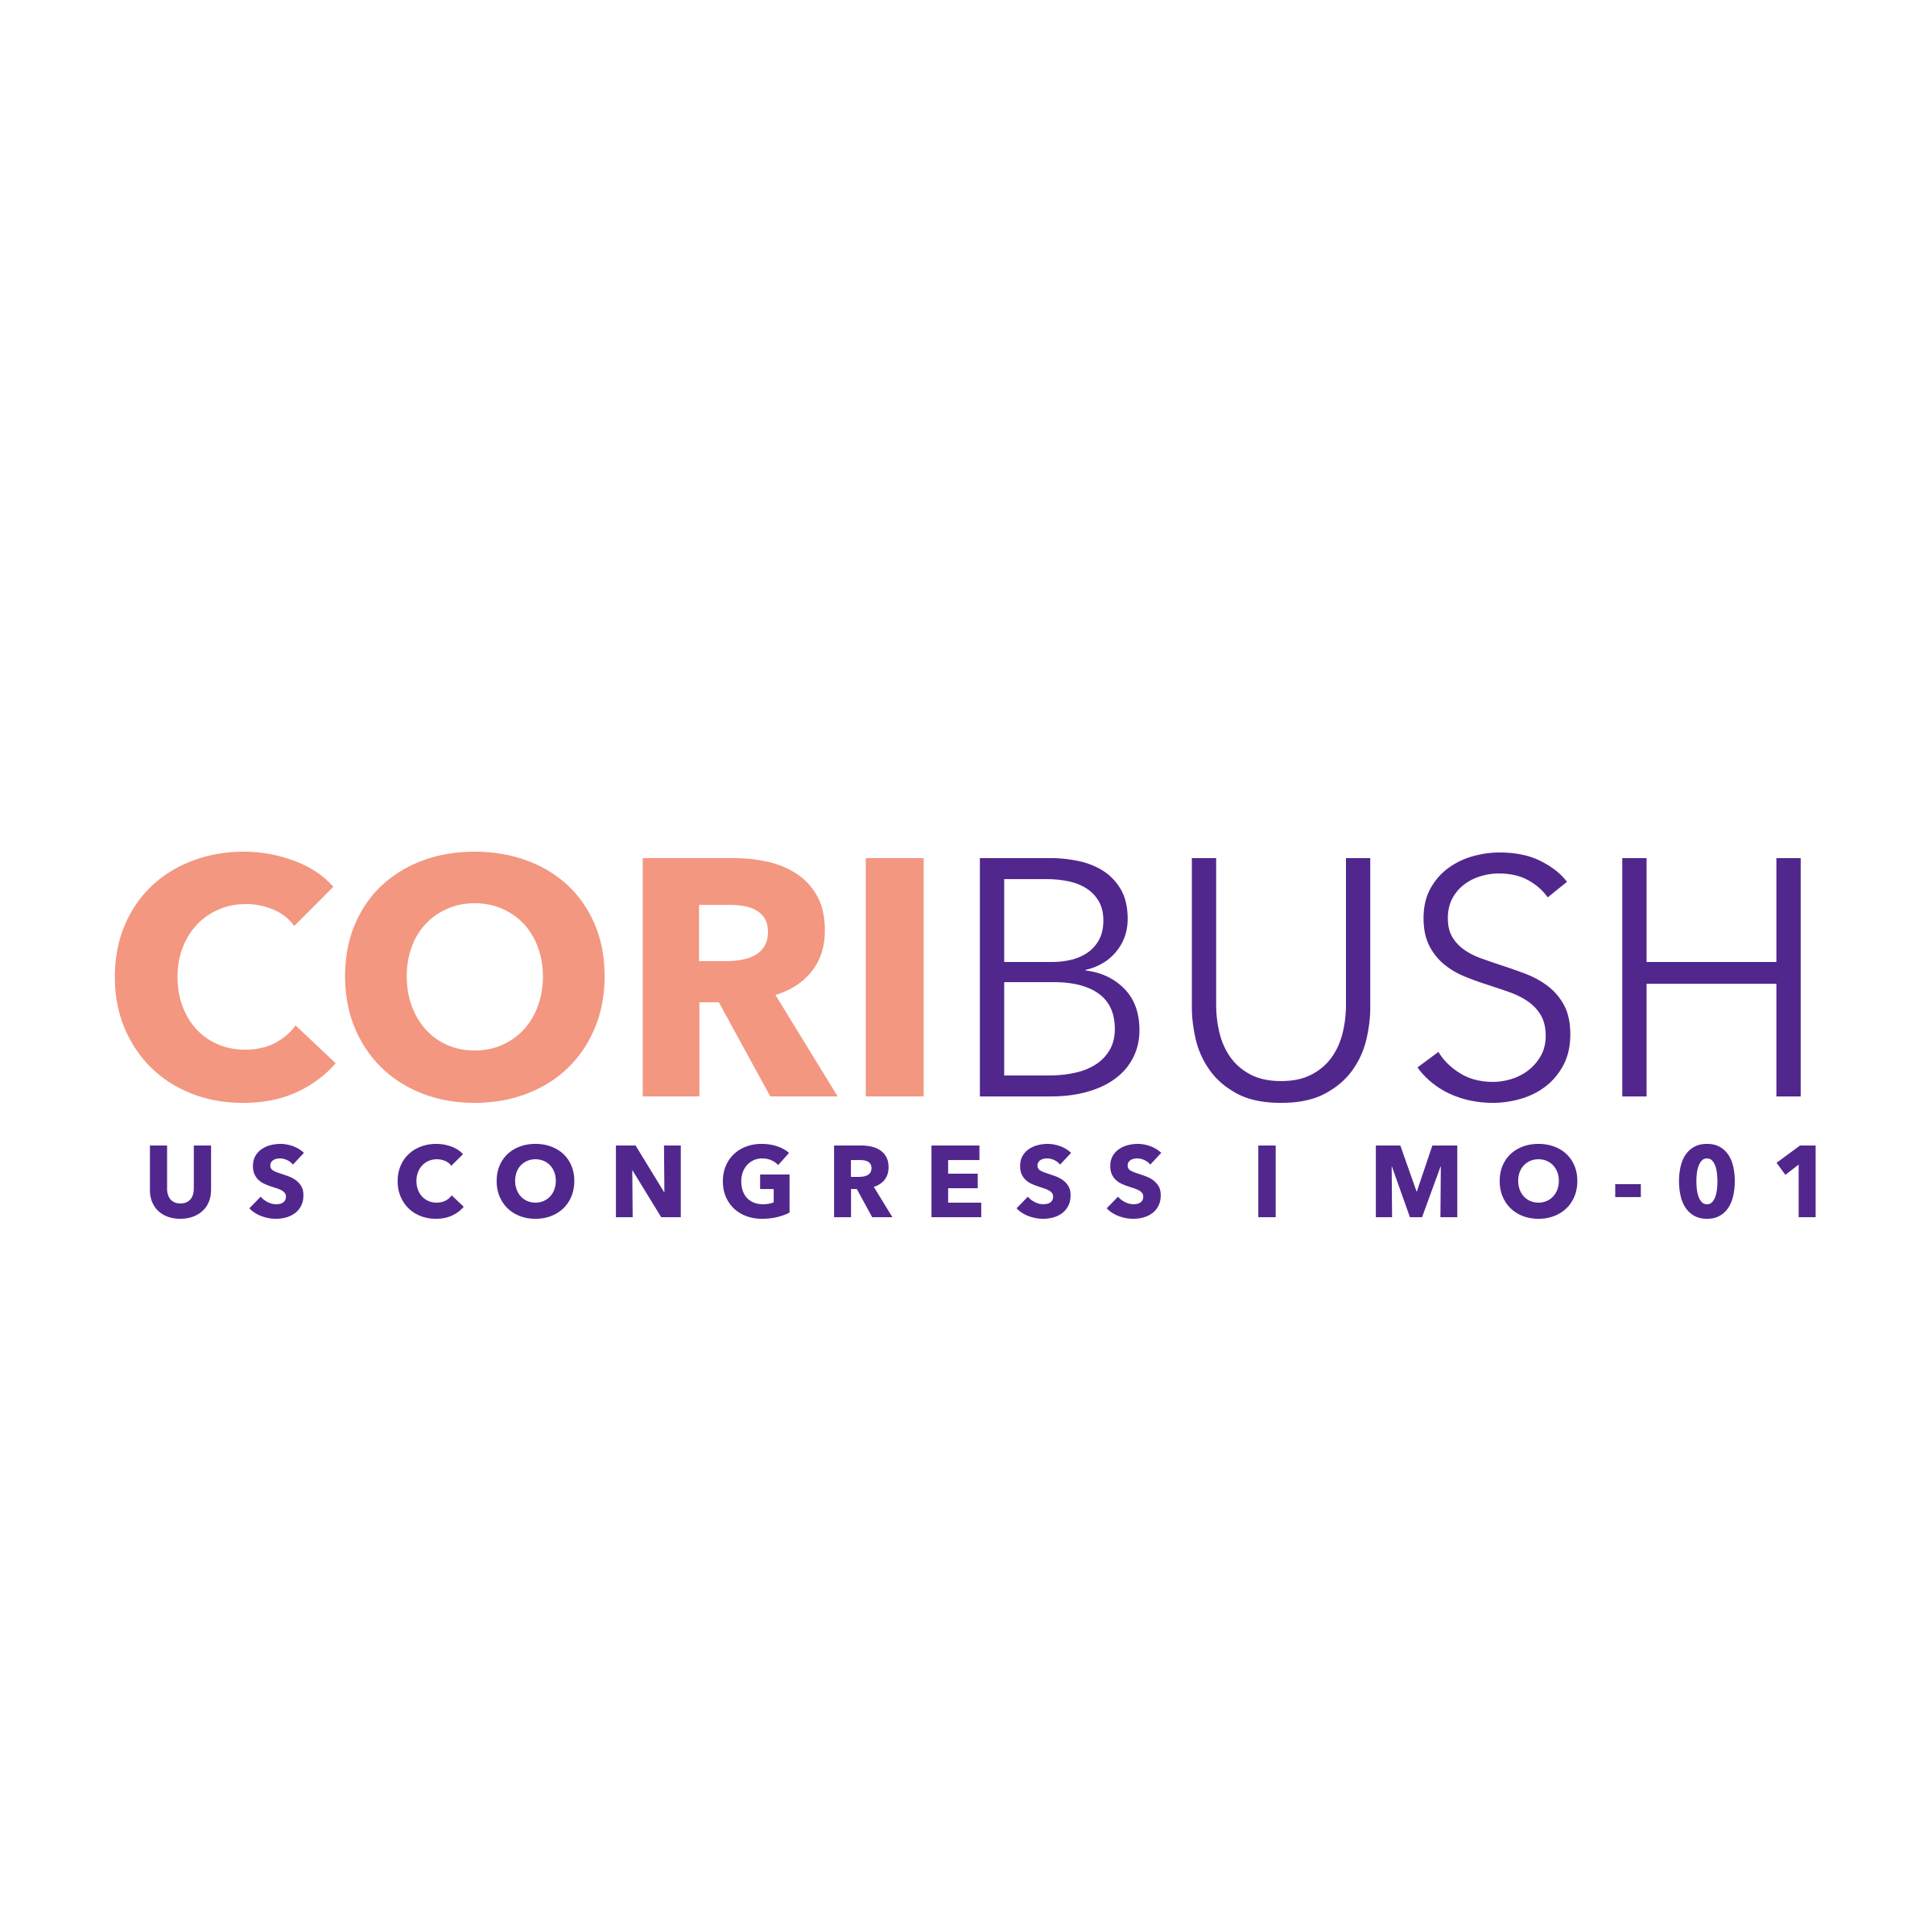 All Hands On Deck Work The Polls On E Day Cori Bush For Congress